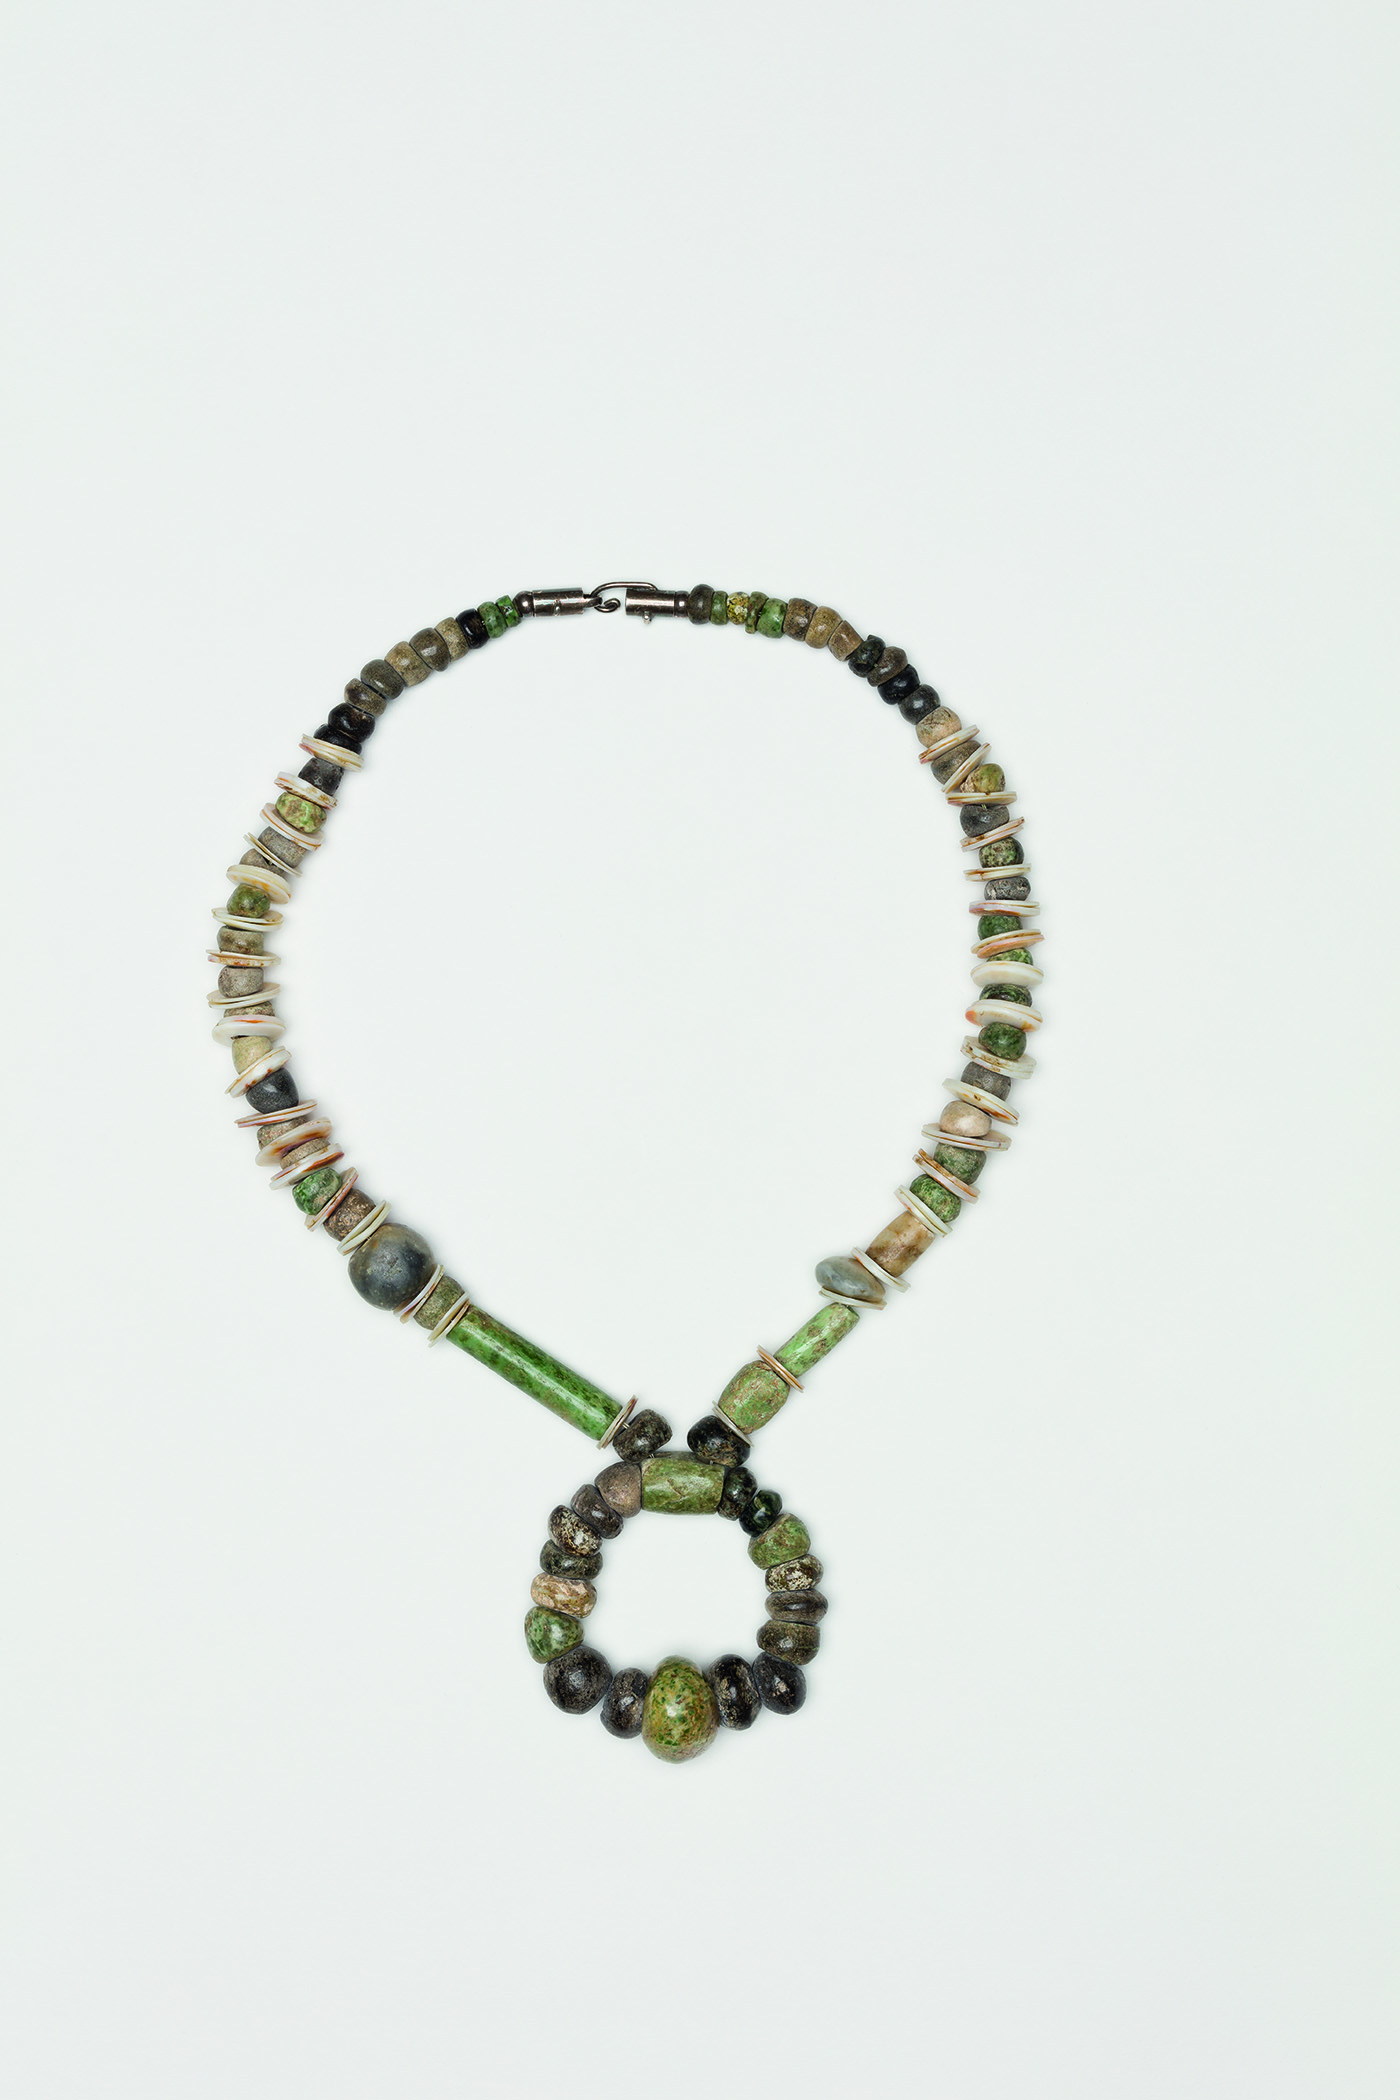   Untitled , 1985  Shells, jade, pre-Columbian beads, silver clasp  13 1/2 x 1 inches  34.29 x 2.54 cm 